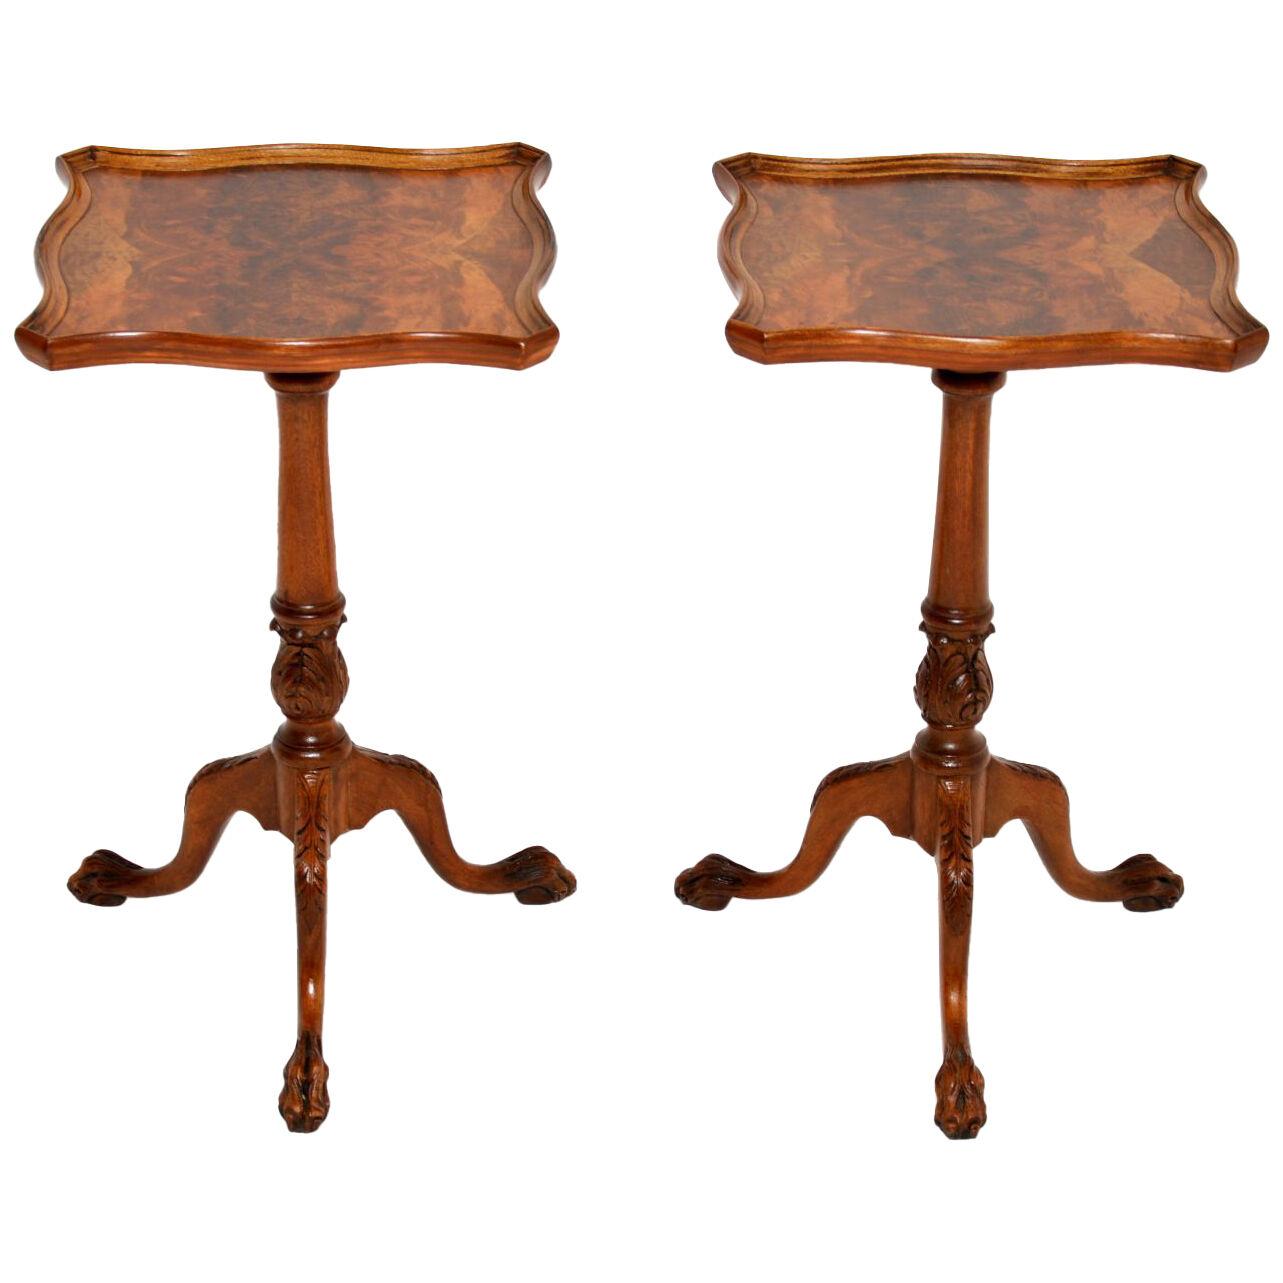 Pair of Antique Burr Walnut Side Tables